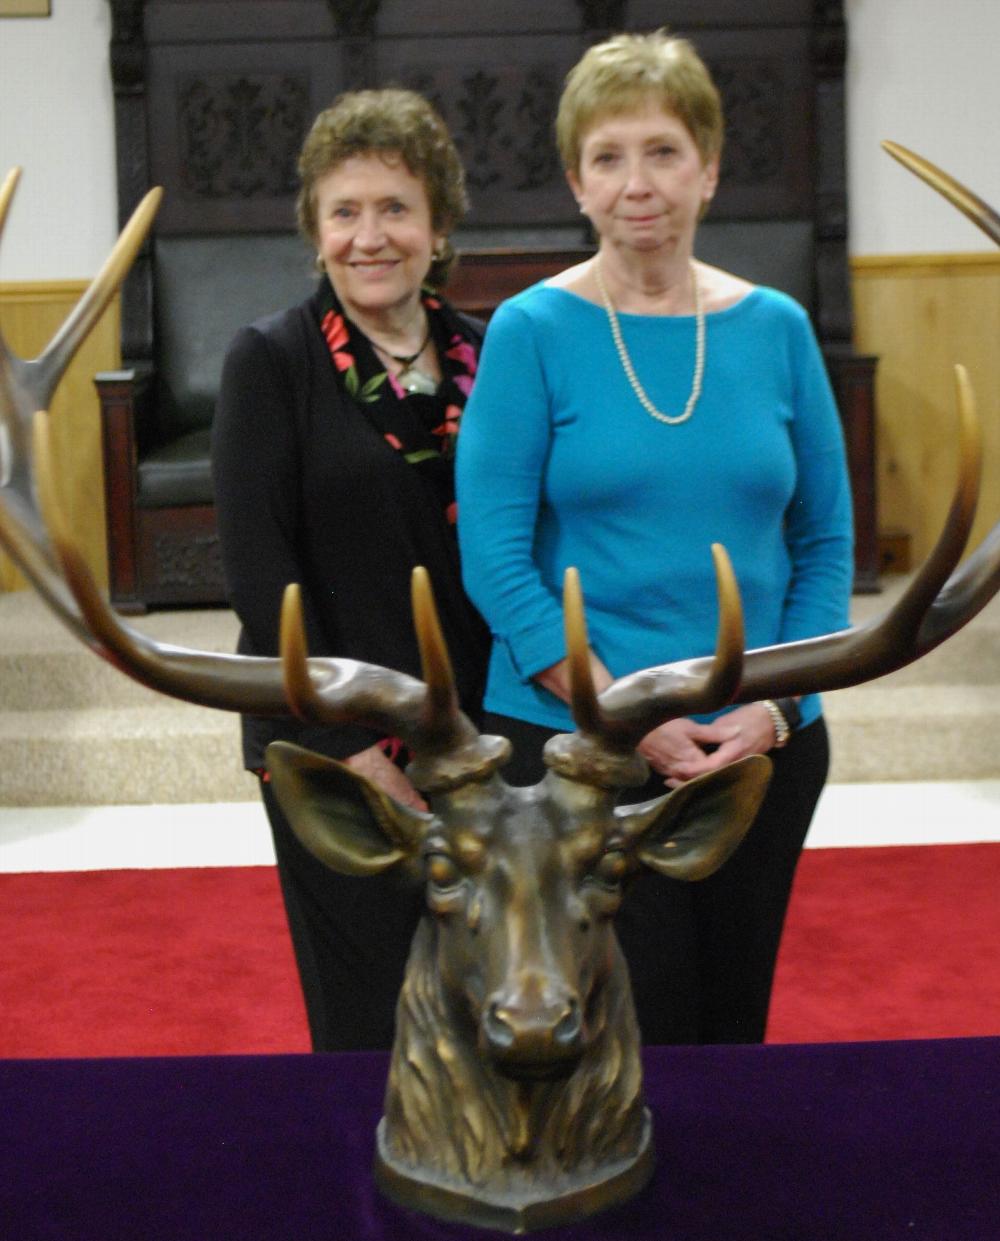 March 2016.  Our Lodge is thrilled to welcome Nancy Guinivan and Geri Aviles to our community of Elks!